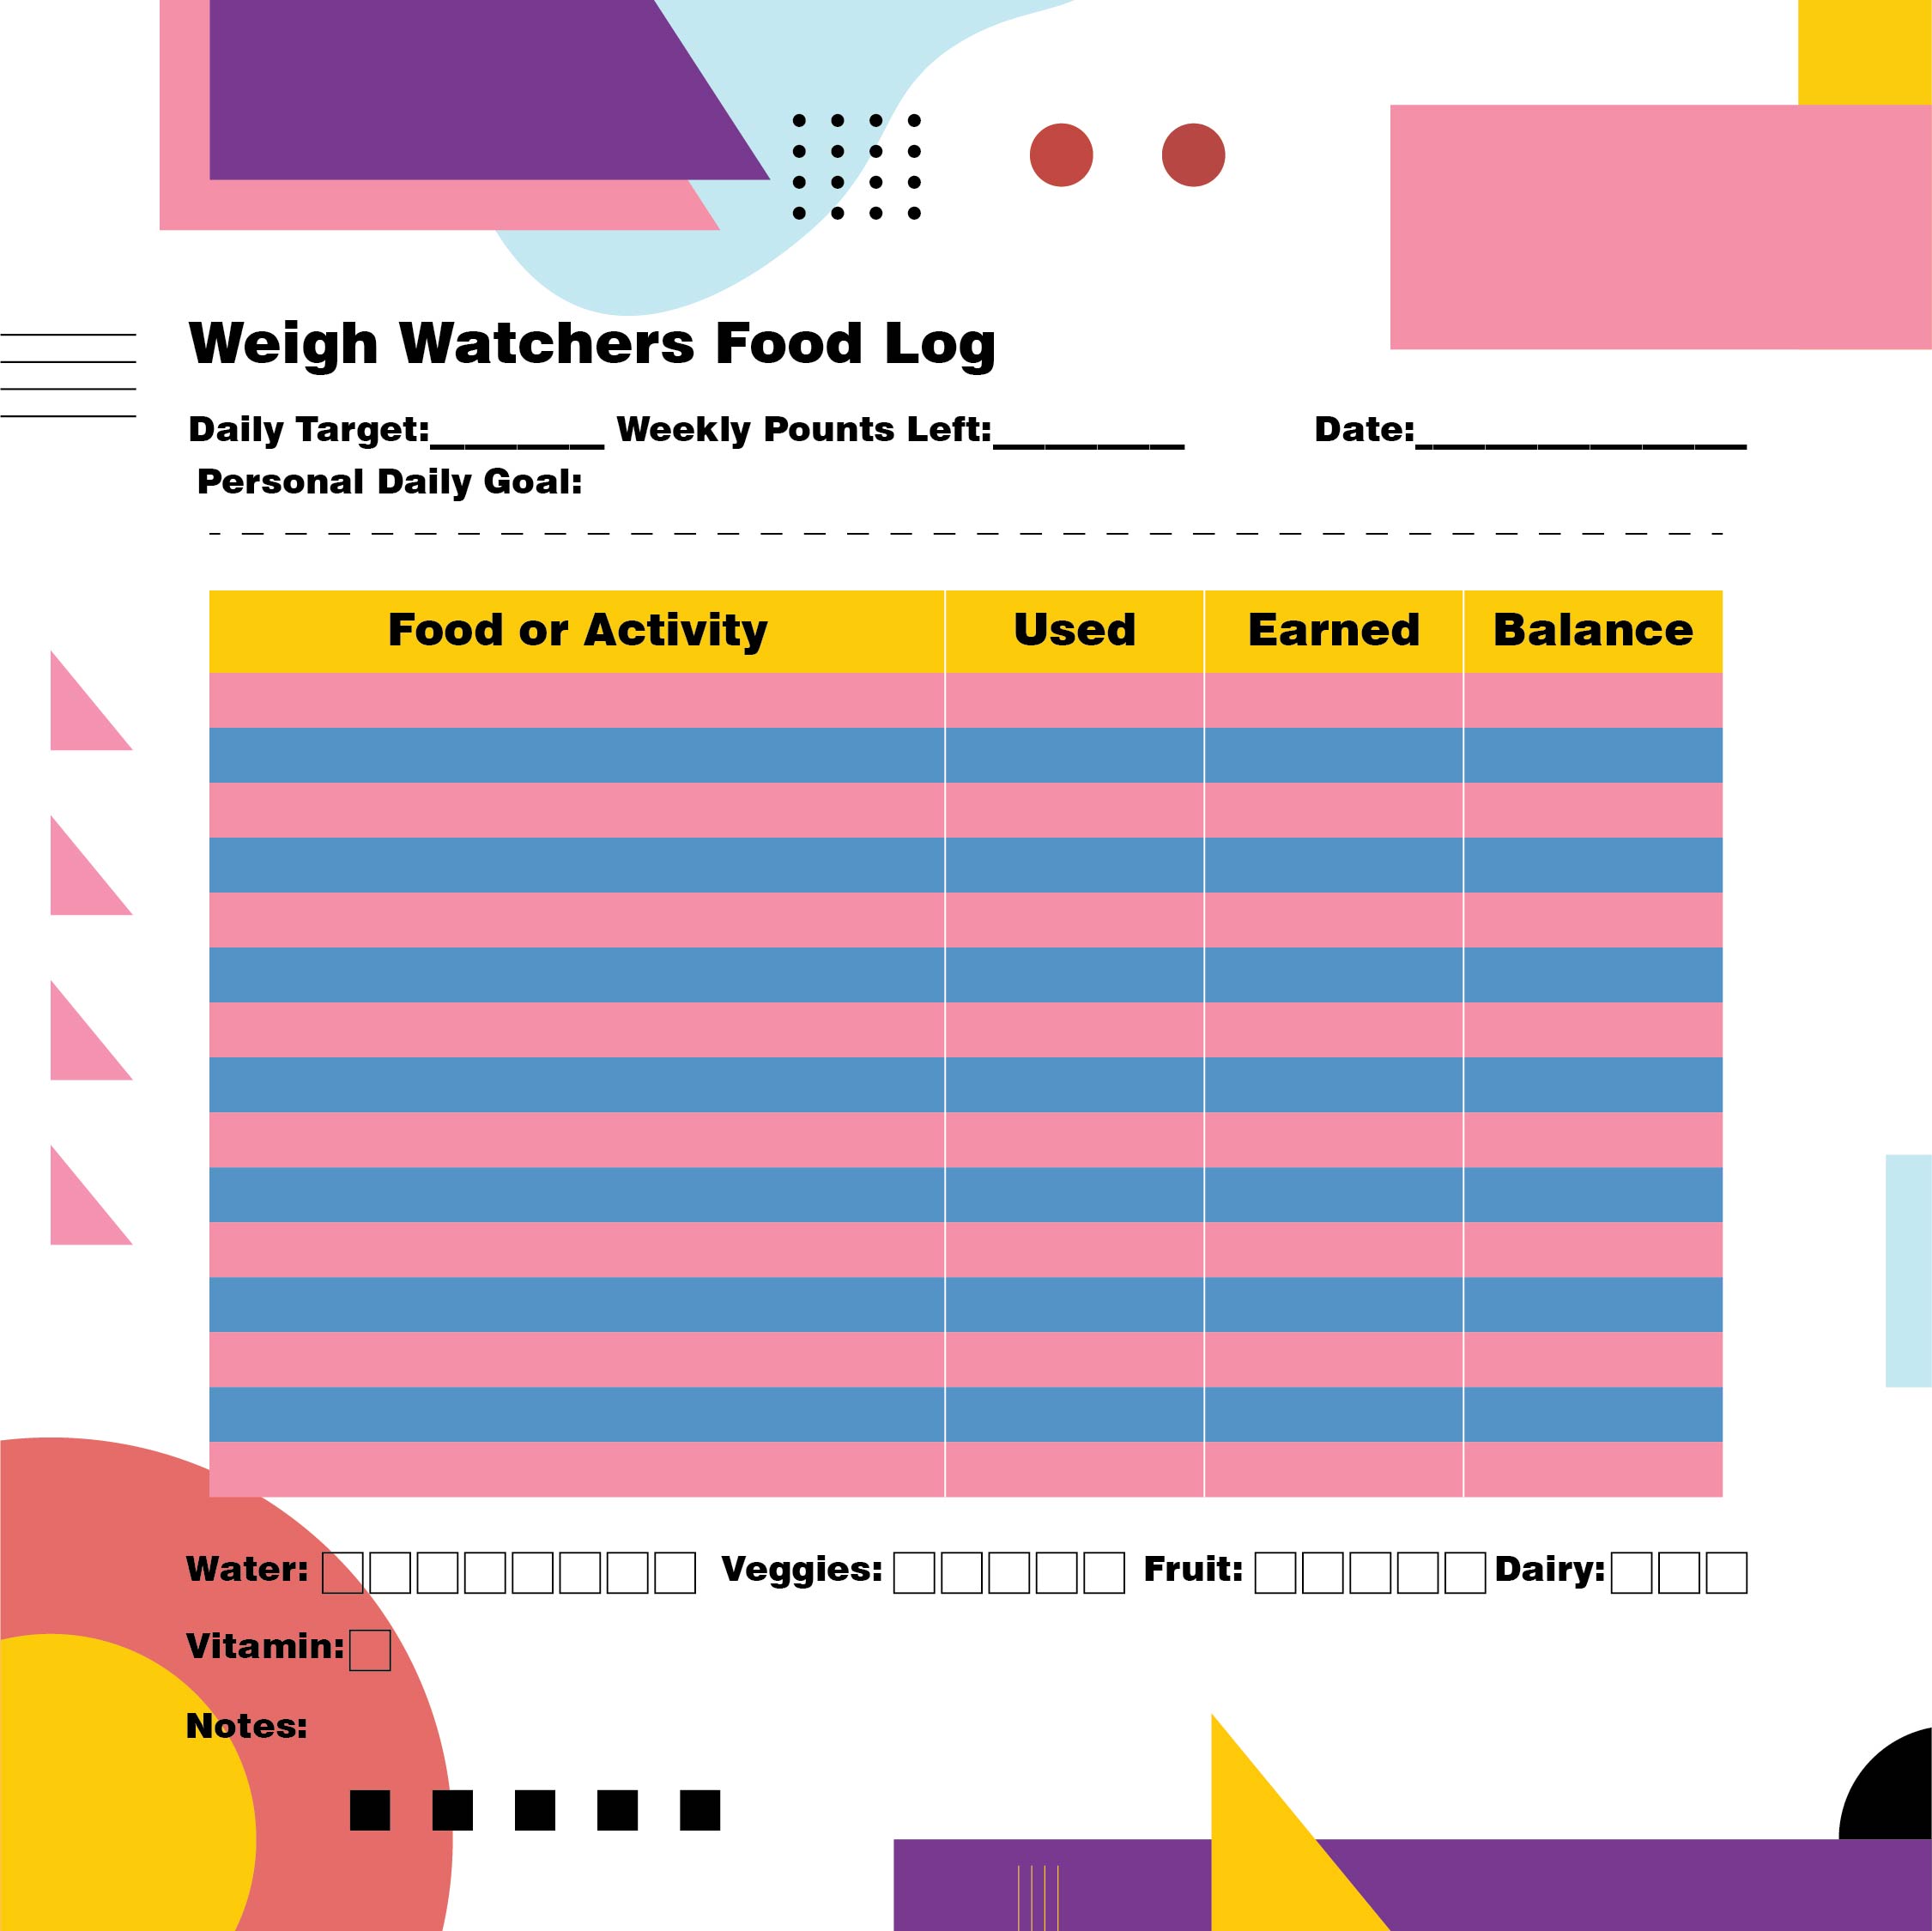 9-best-images-of-weight-watchers-logs-printable-weight-watchers-food-log-printable-weight